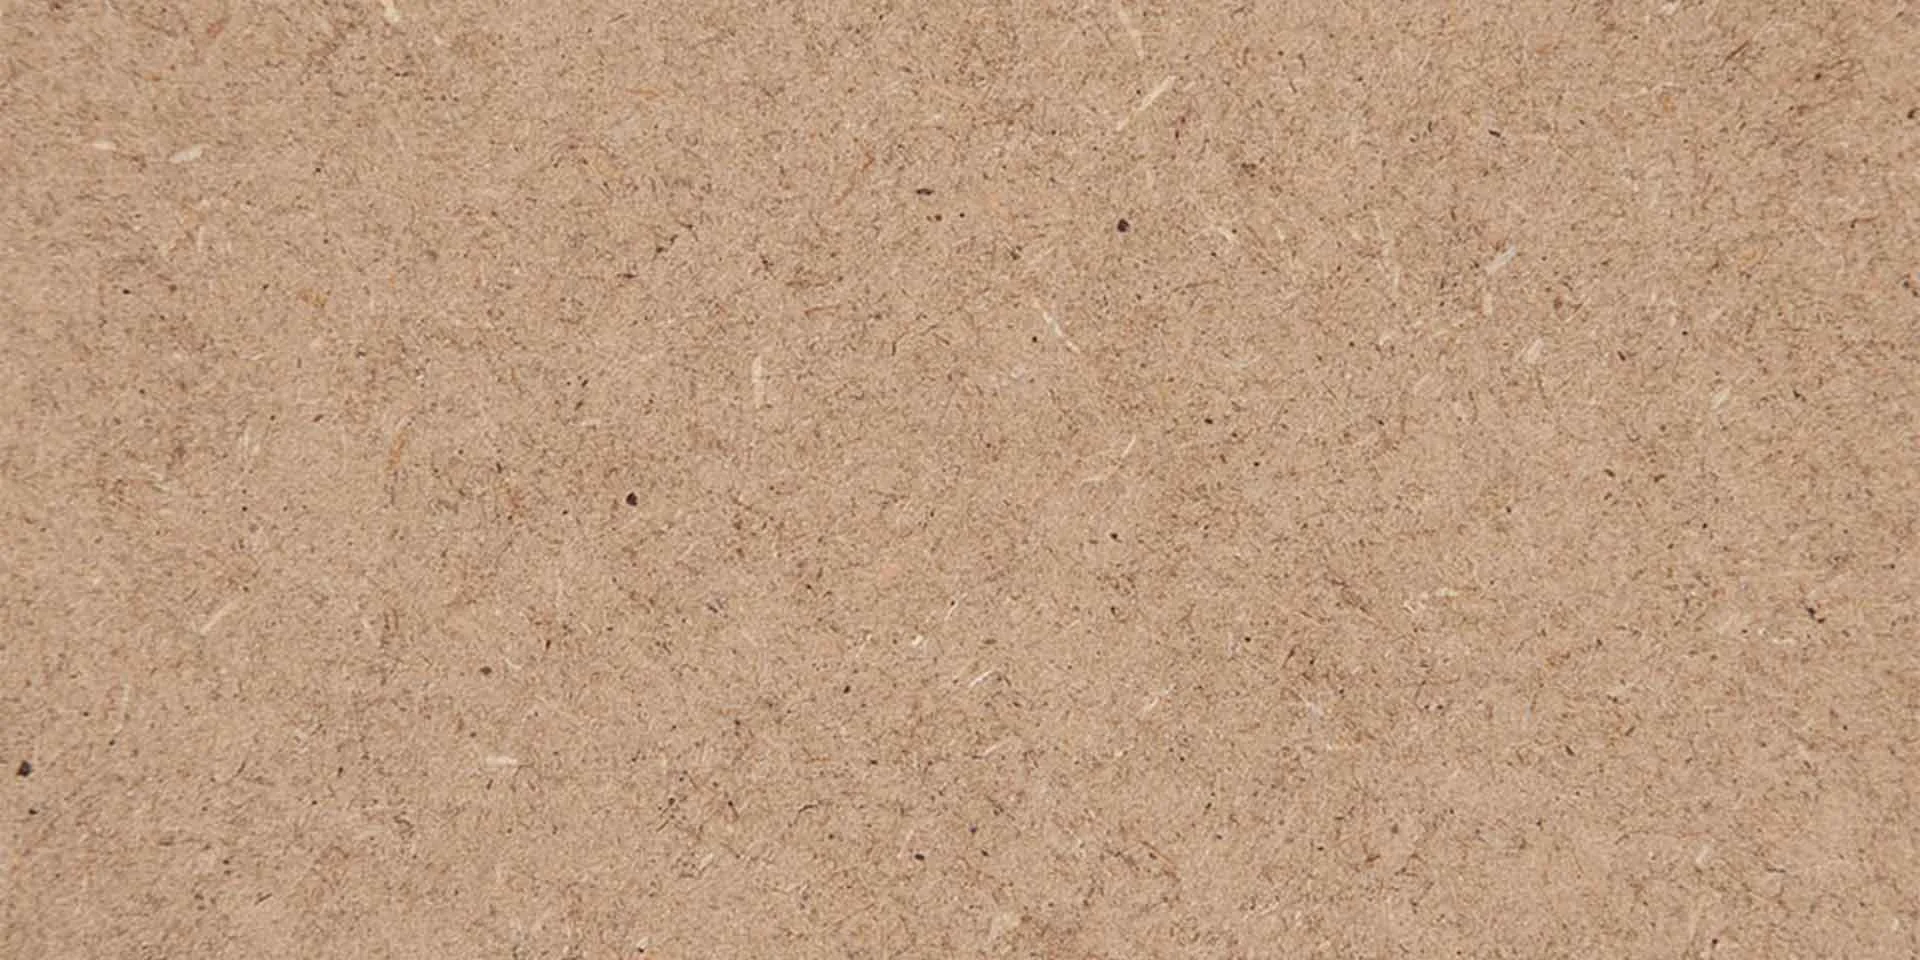 TSFC018 in MDF natural